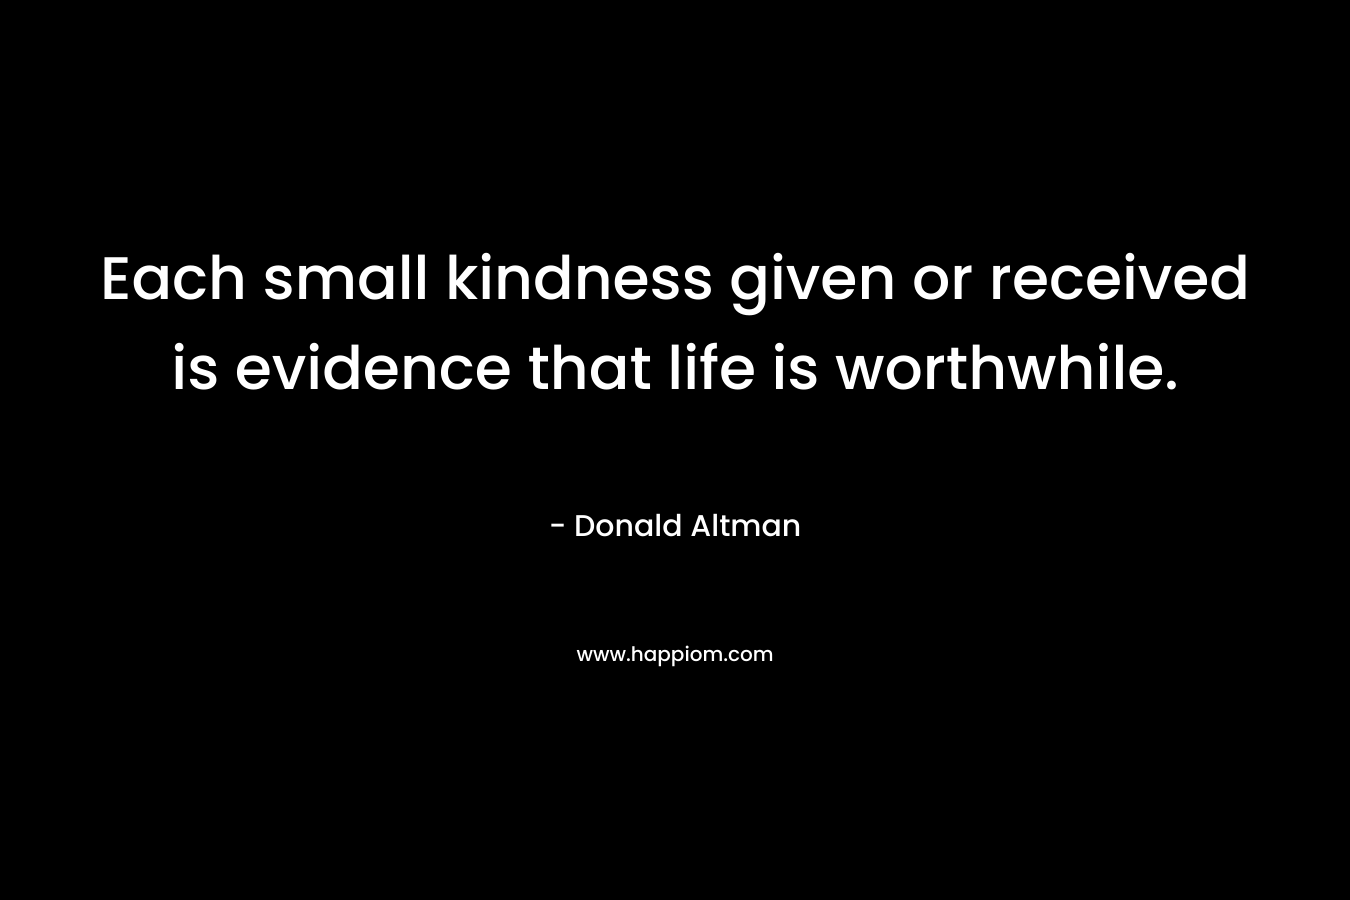 Each small kindness given or received is evidence that life is worthwhile.